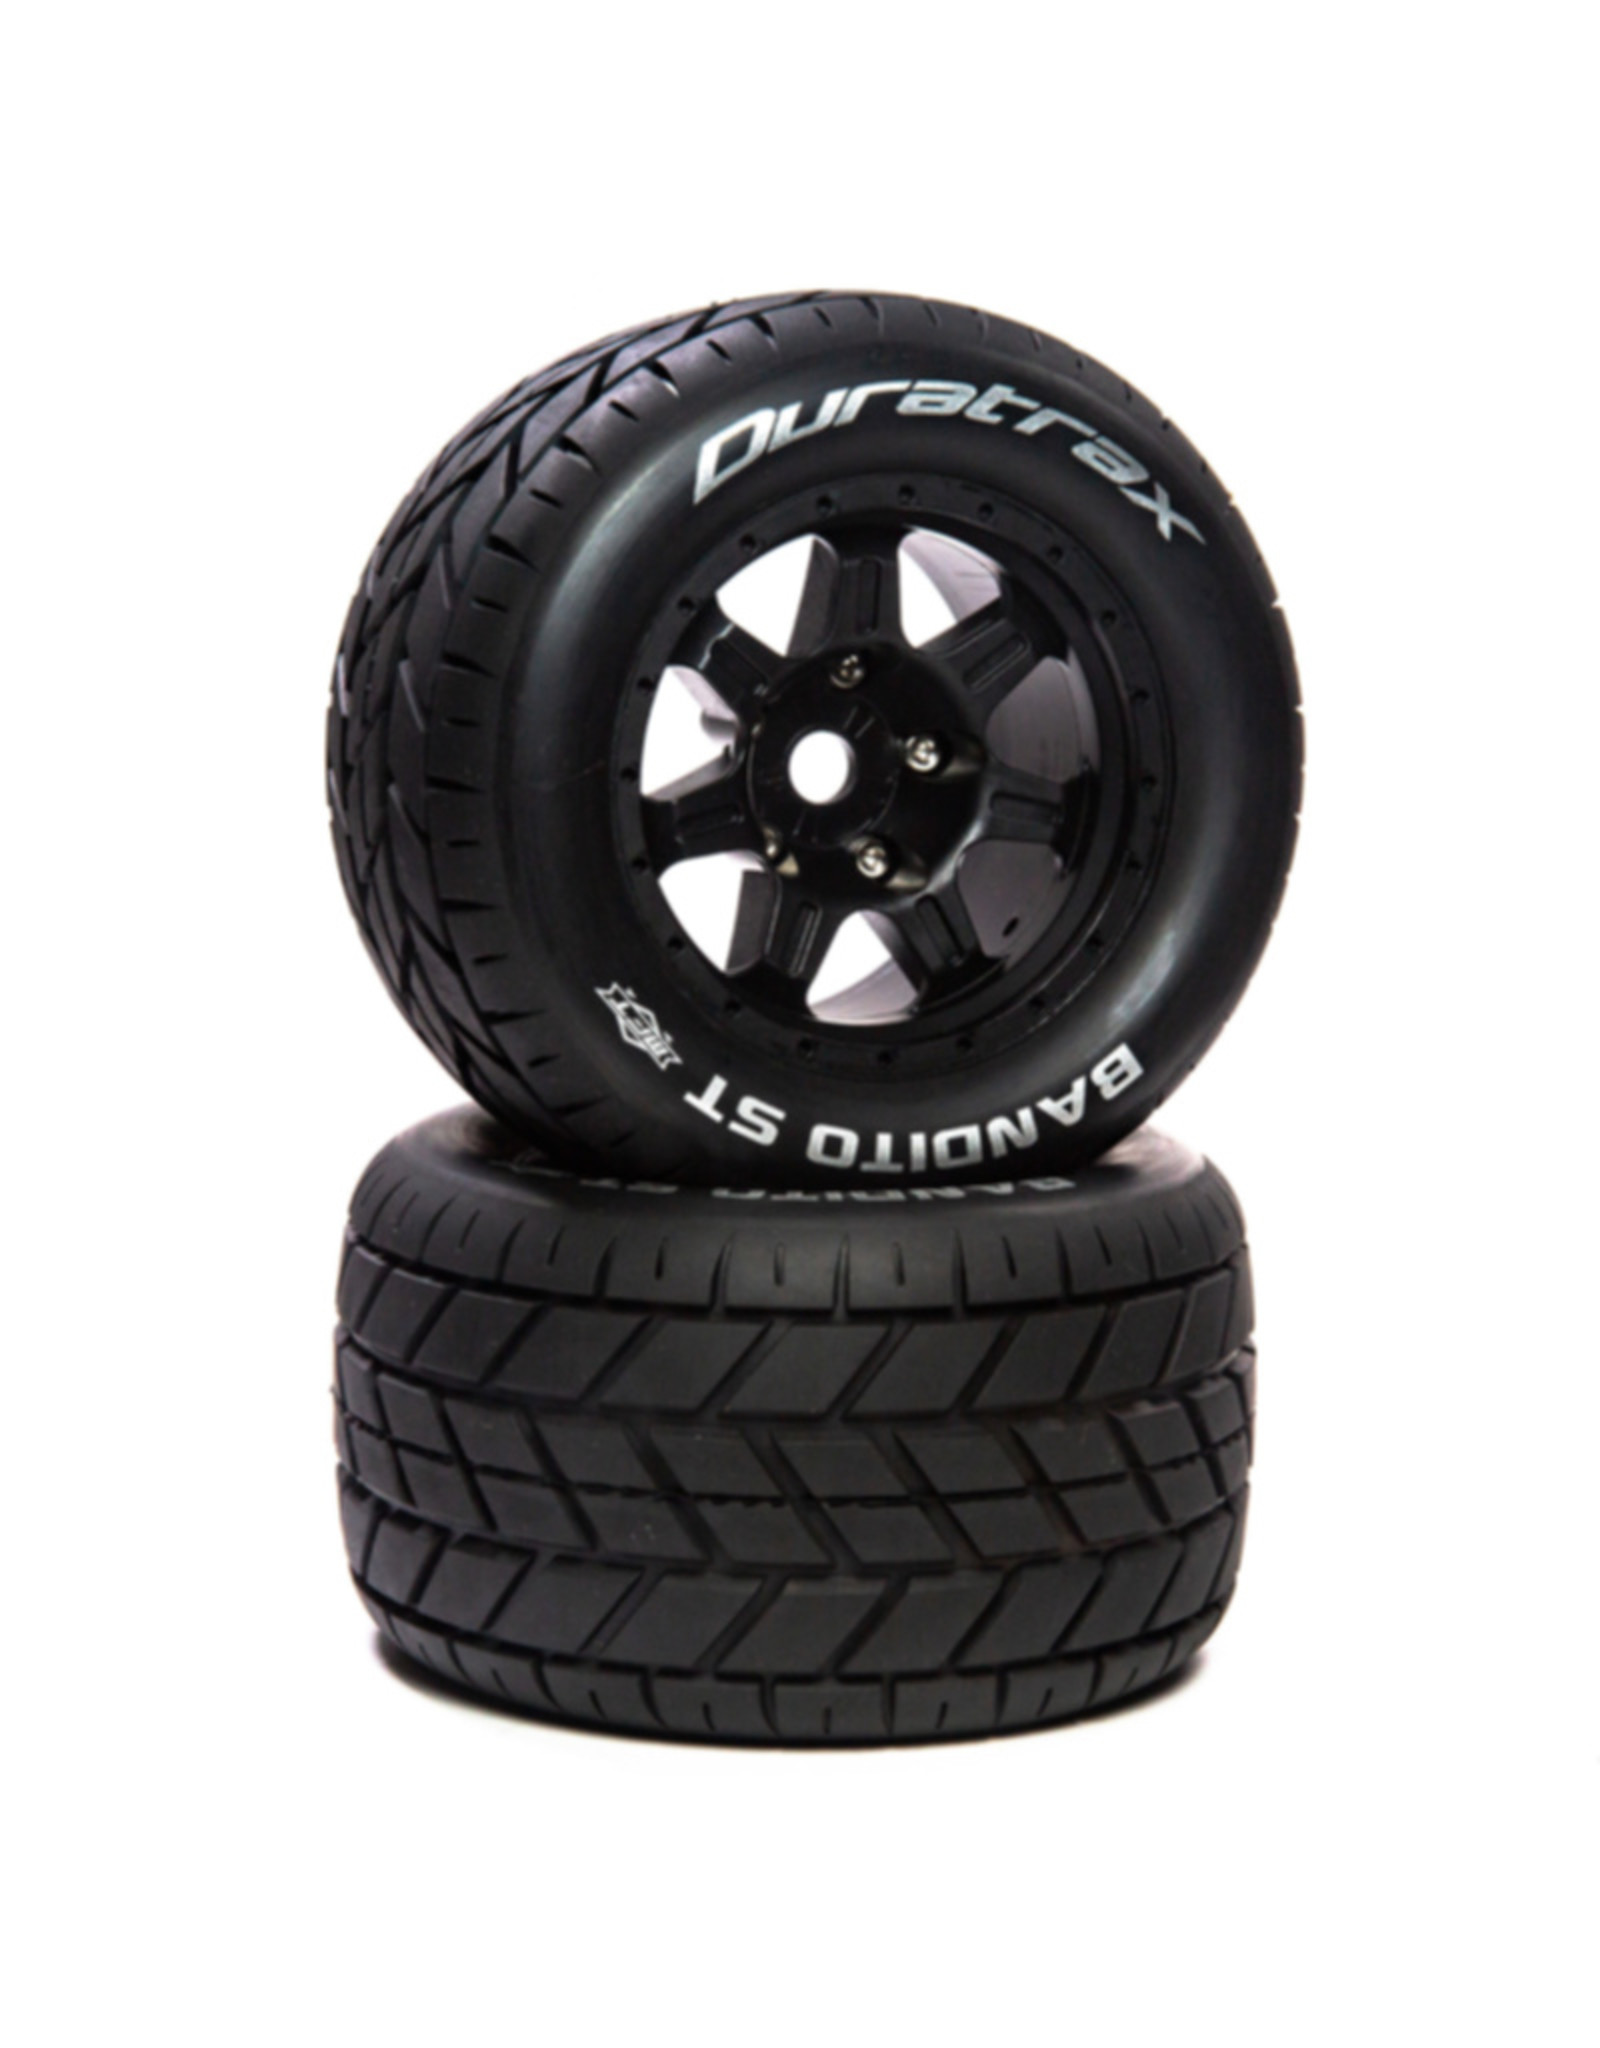 Duratrax DTXC5612  Bandito ST Belt 3.8" Mounted Front/Rear Tires .5 Offset 17mm, Black (2)